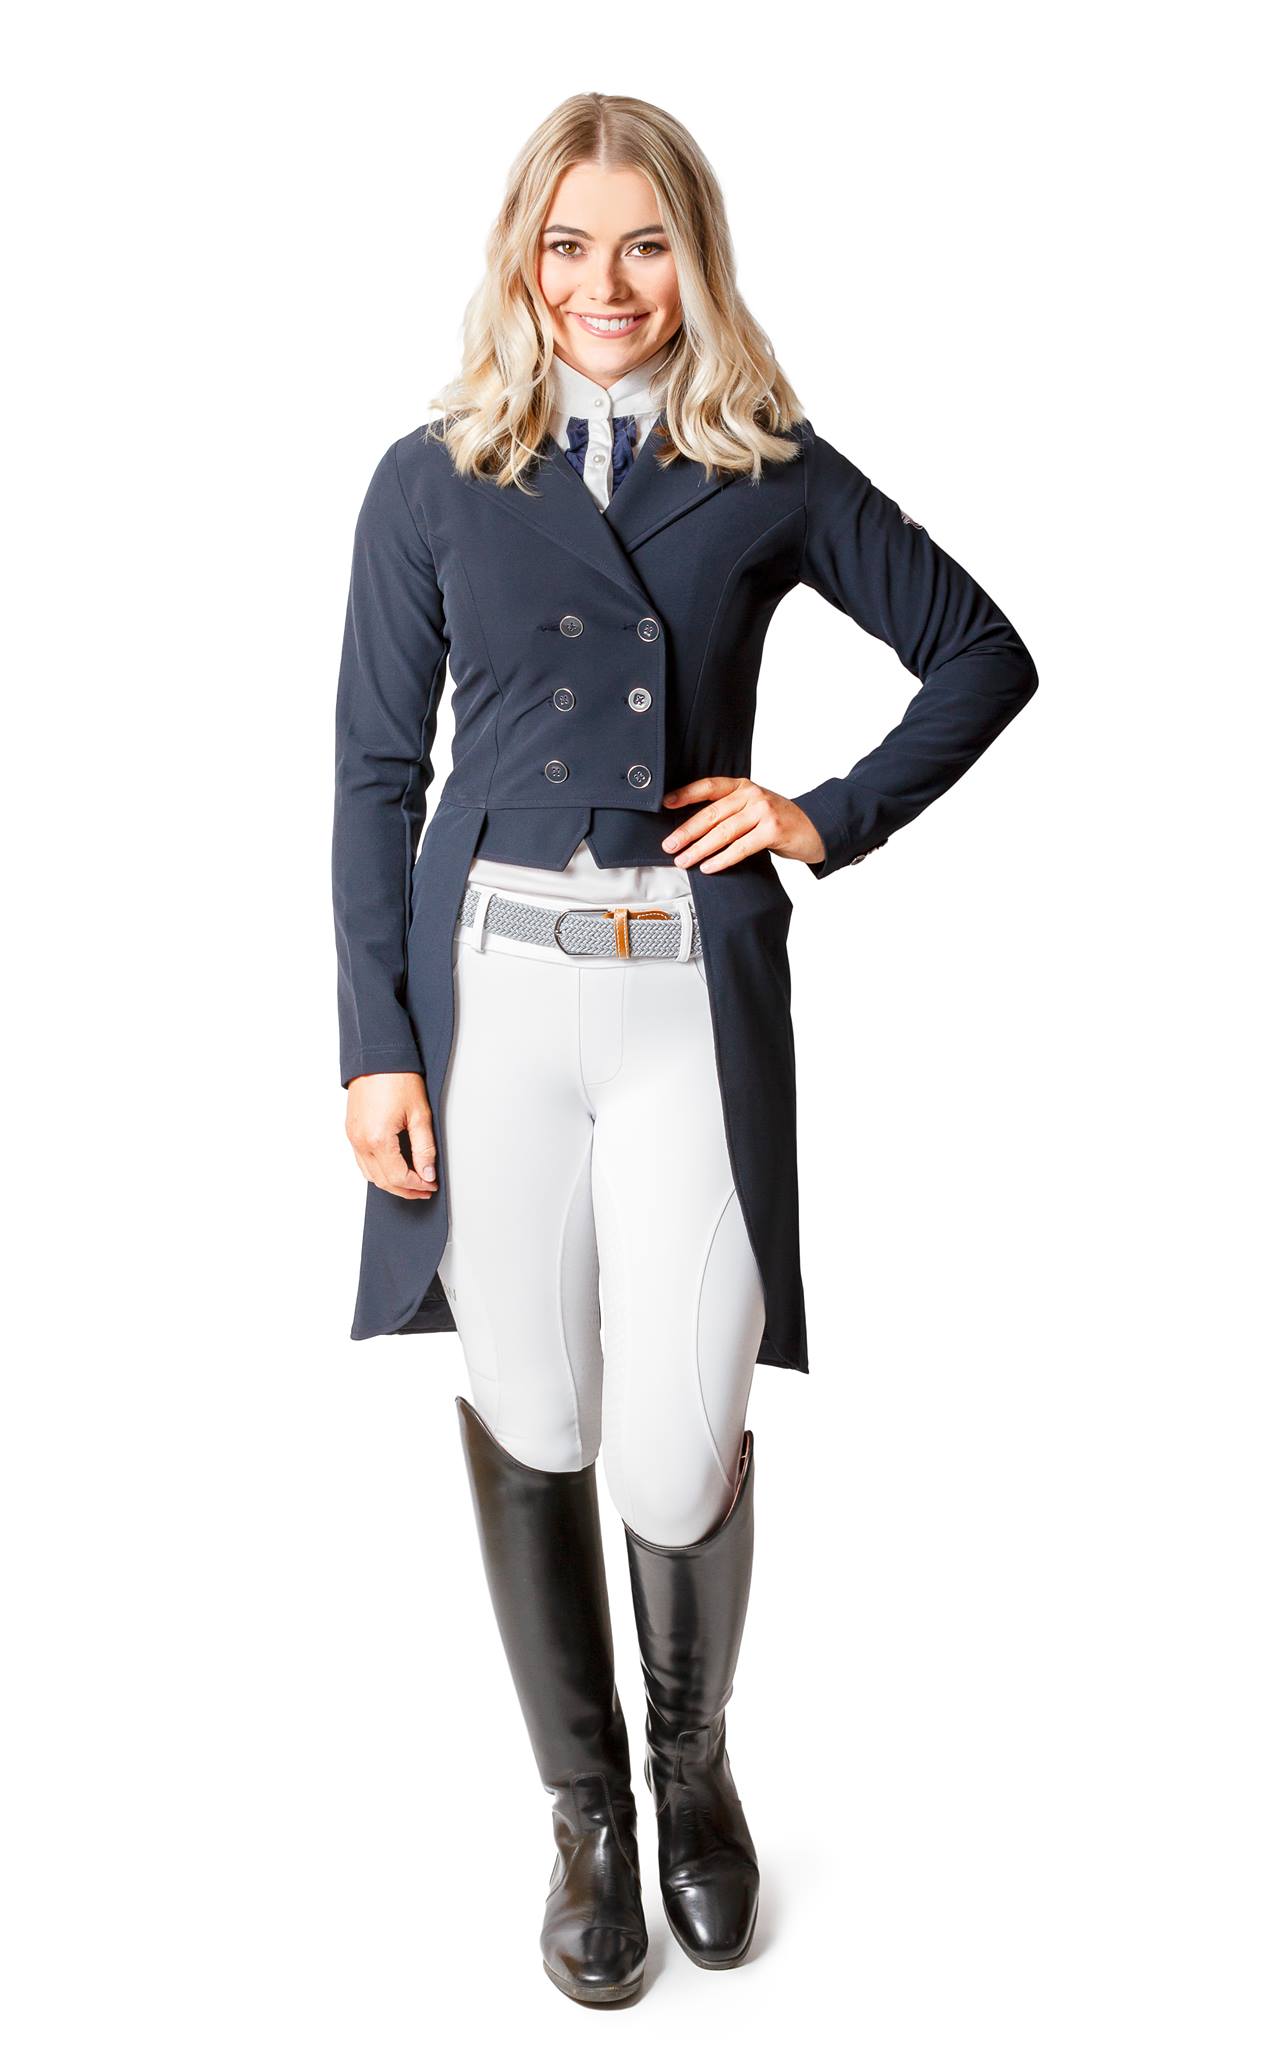 Woman standing in horse riding tights, navy jacket, and black boots.